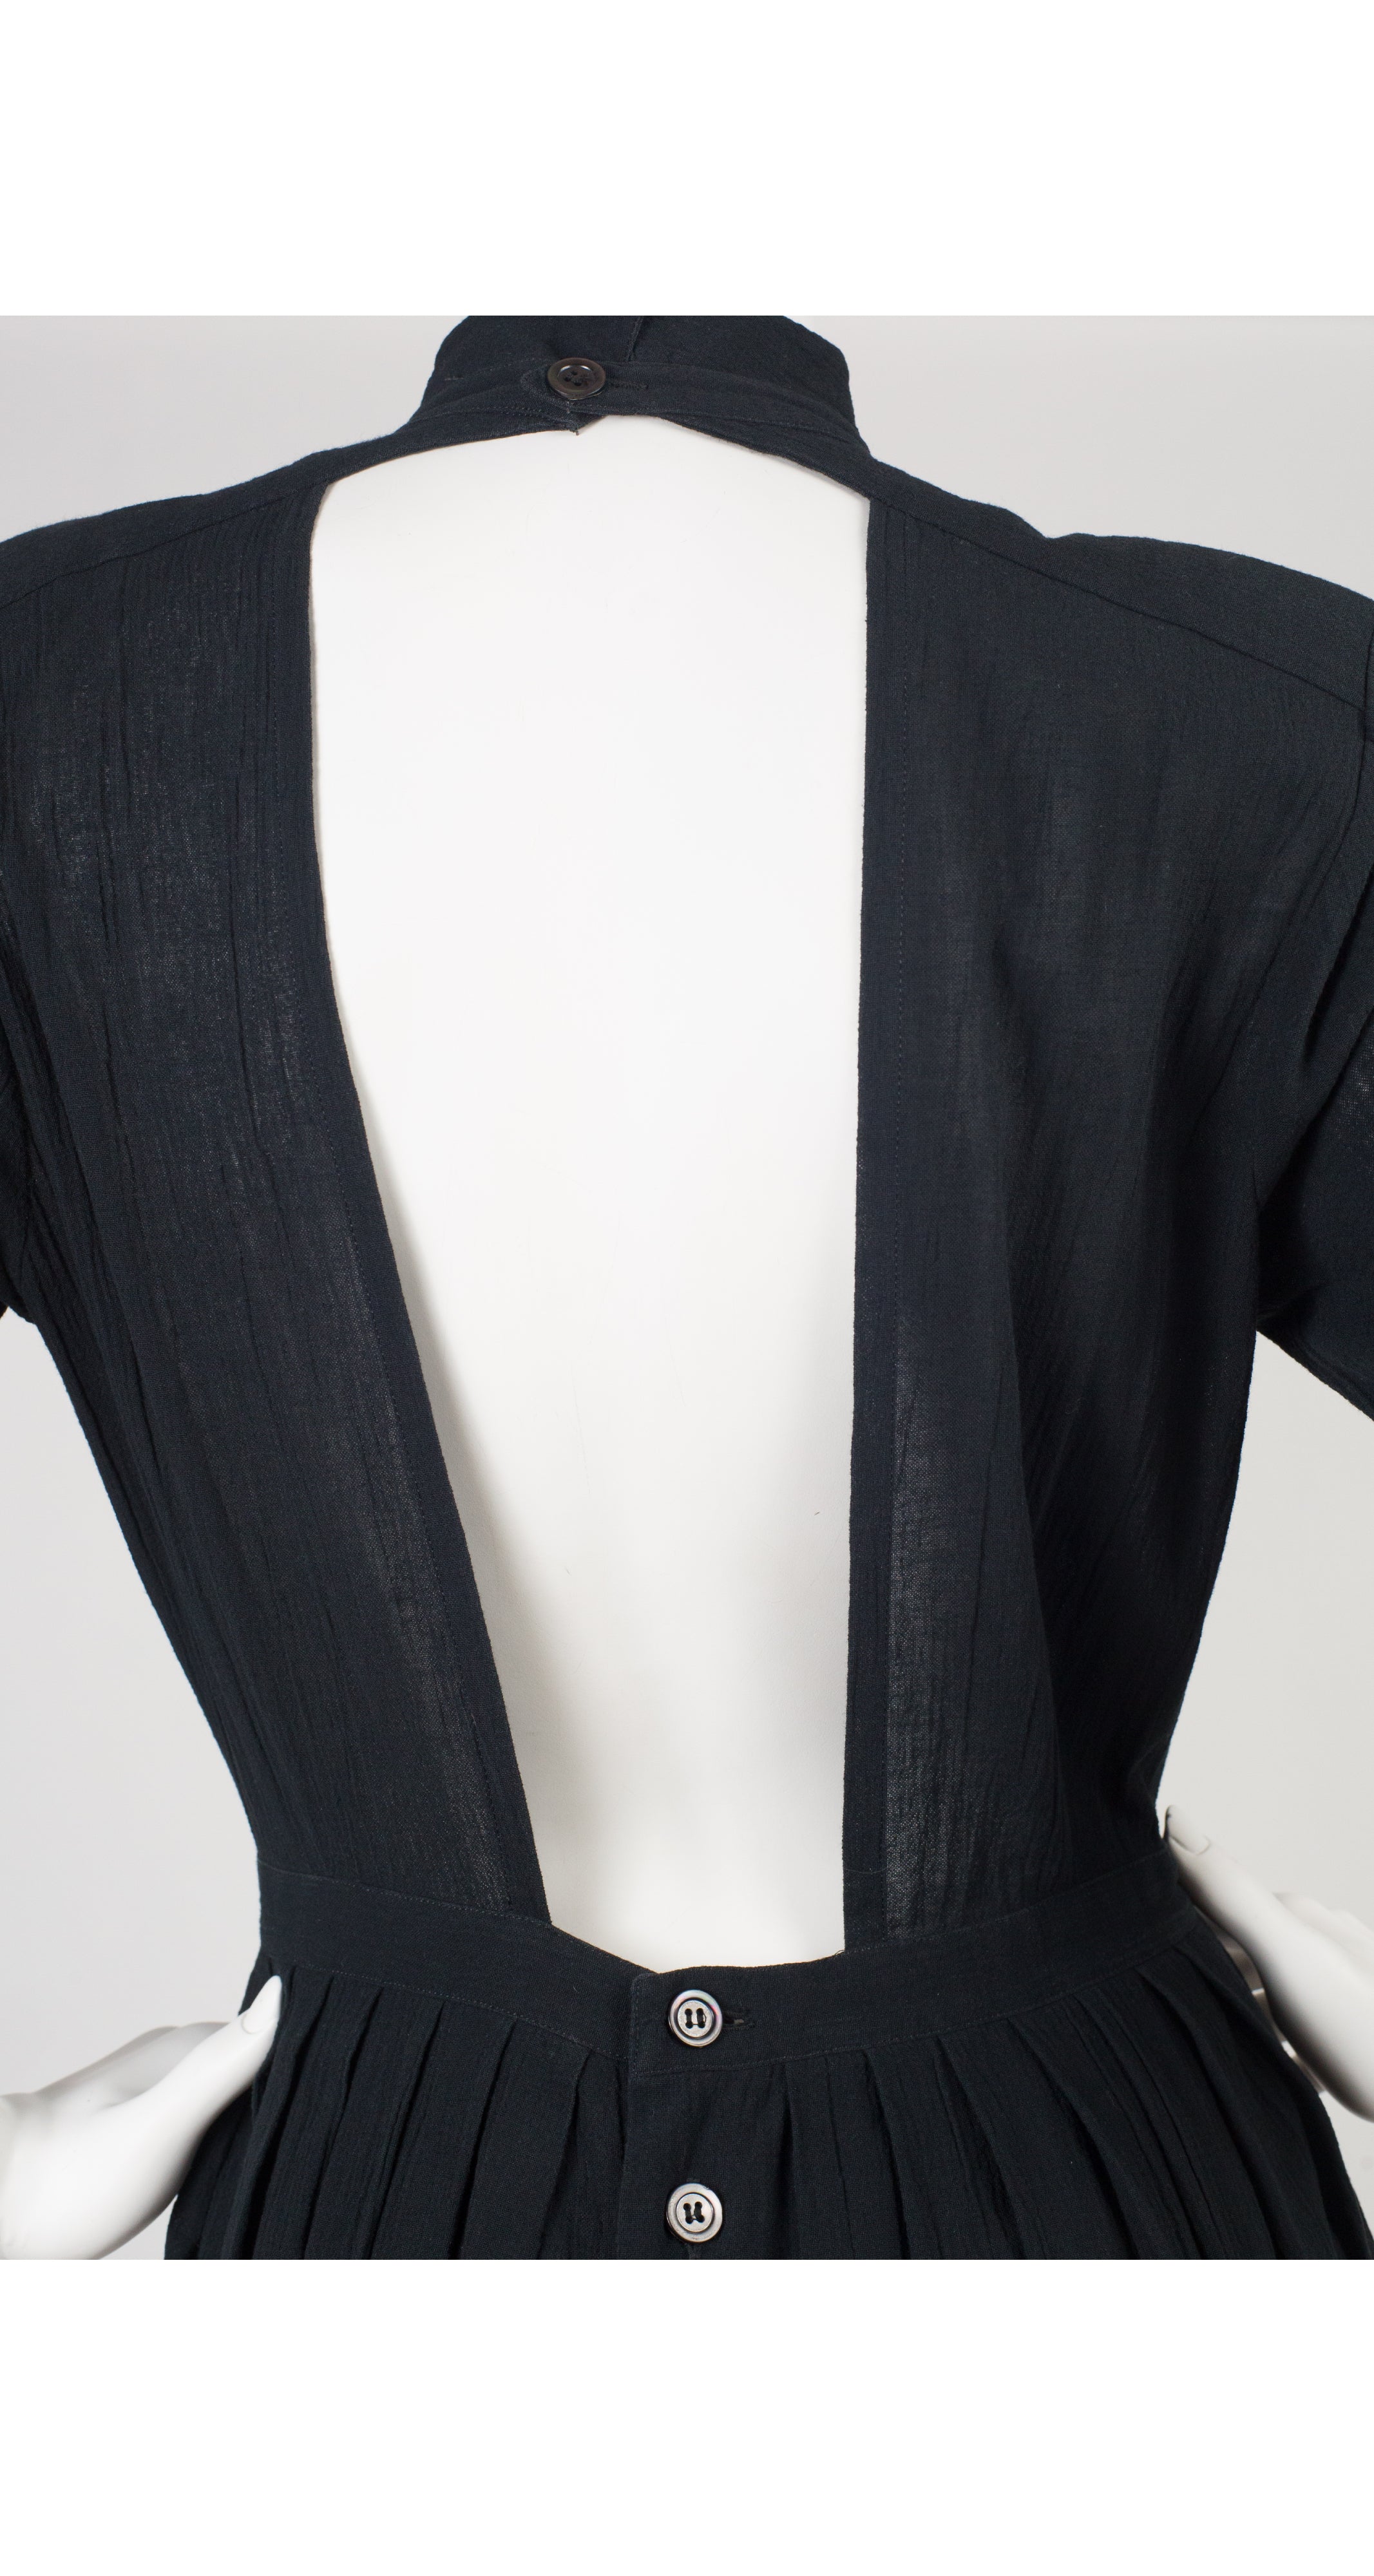 1980s Black Cotton Pleated Backless Dress